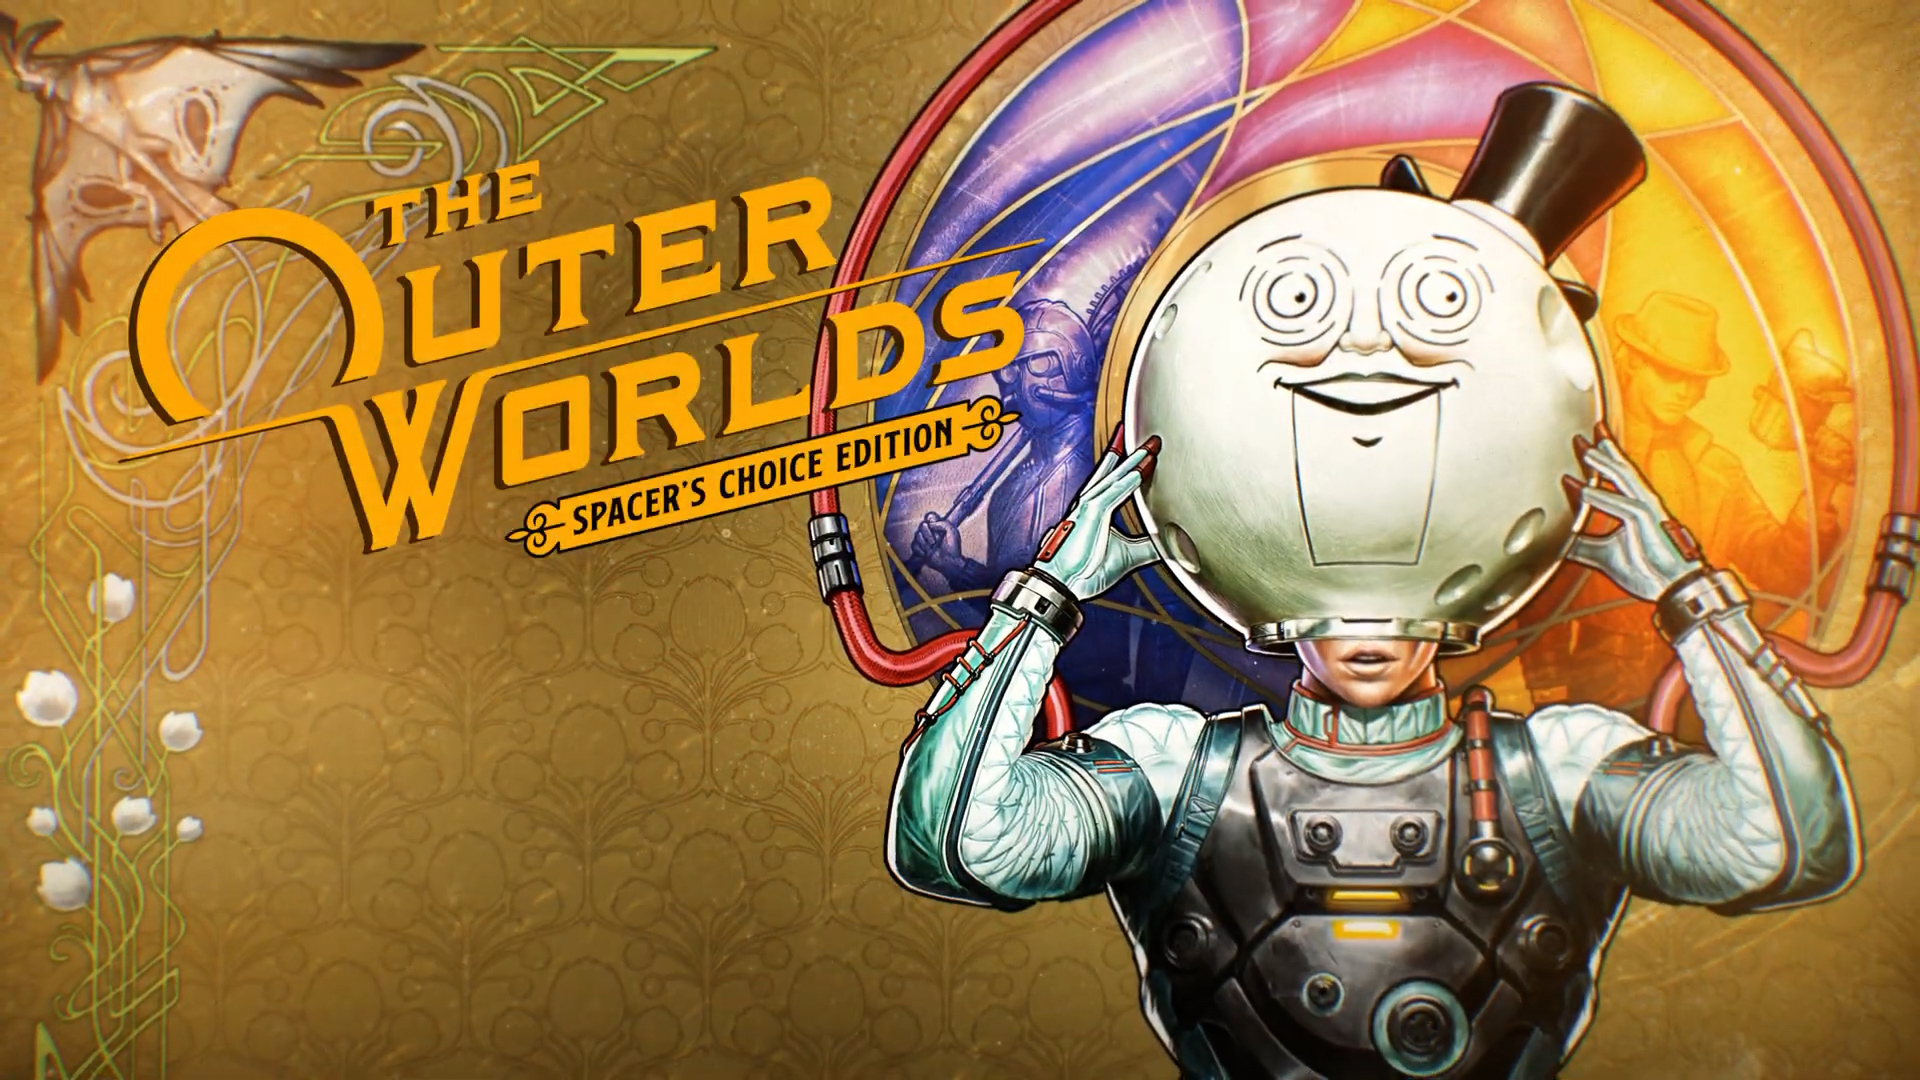 Rough sleep otte Tutor The Outer Worlds Spacer's Choice Edition – Official Trailer - GameSpot